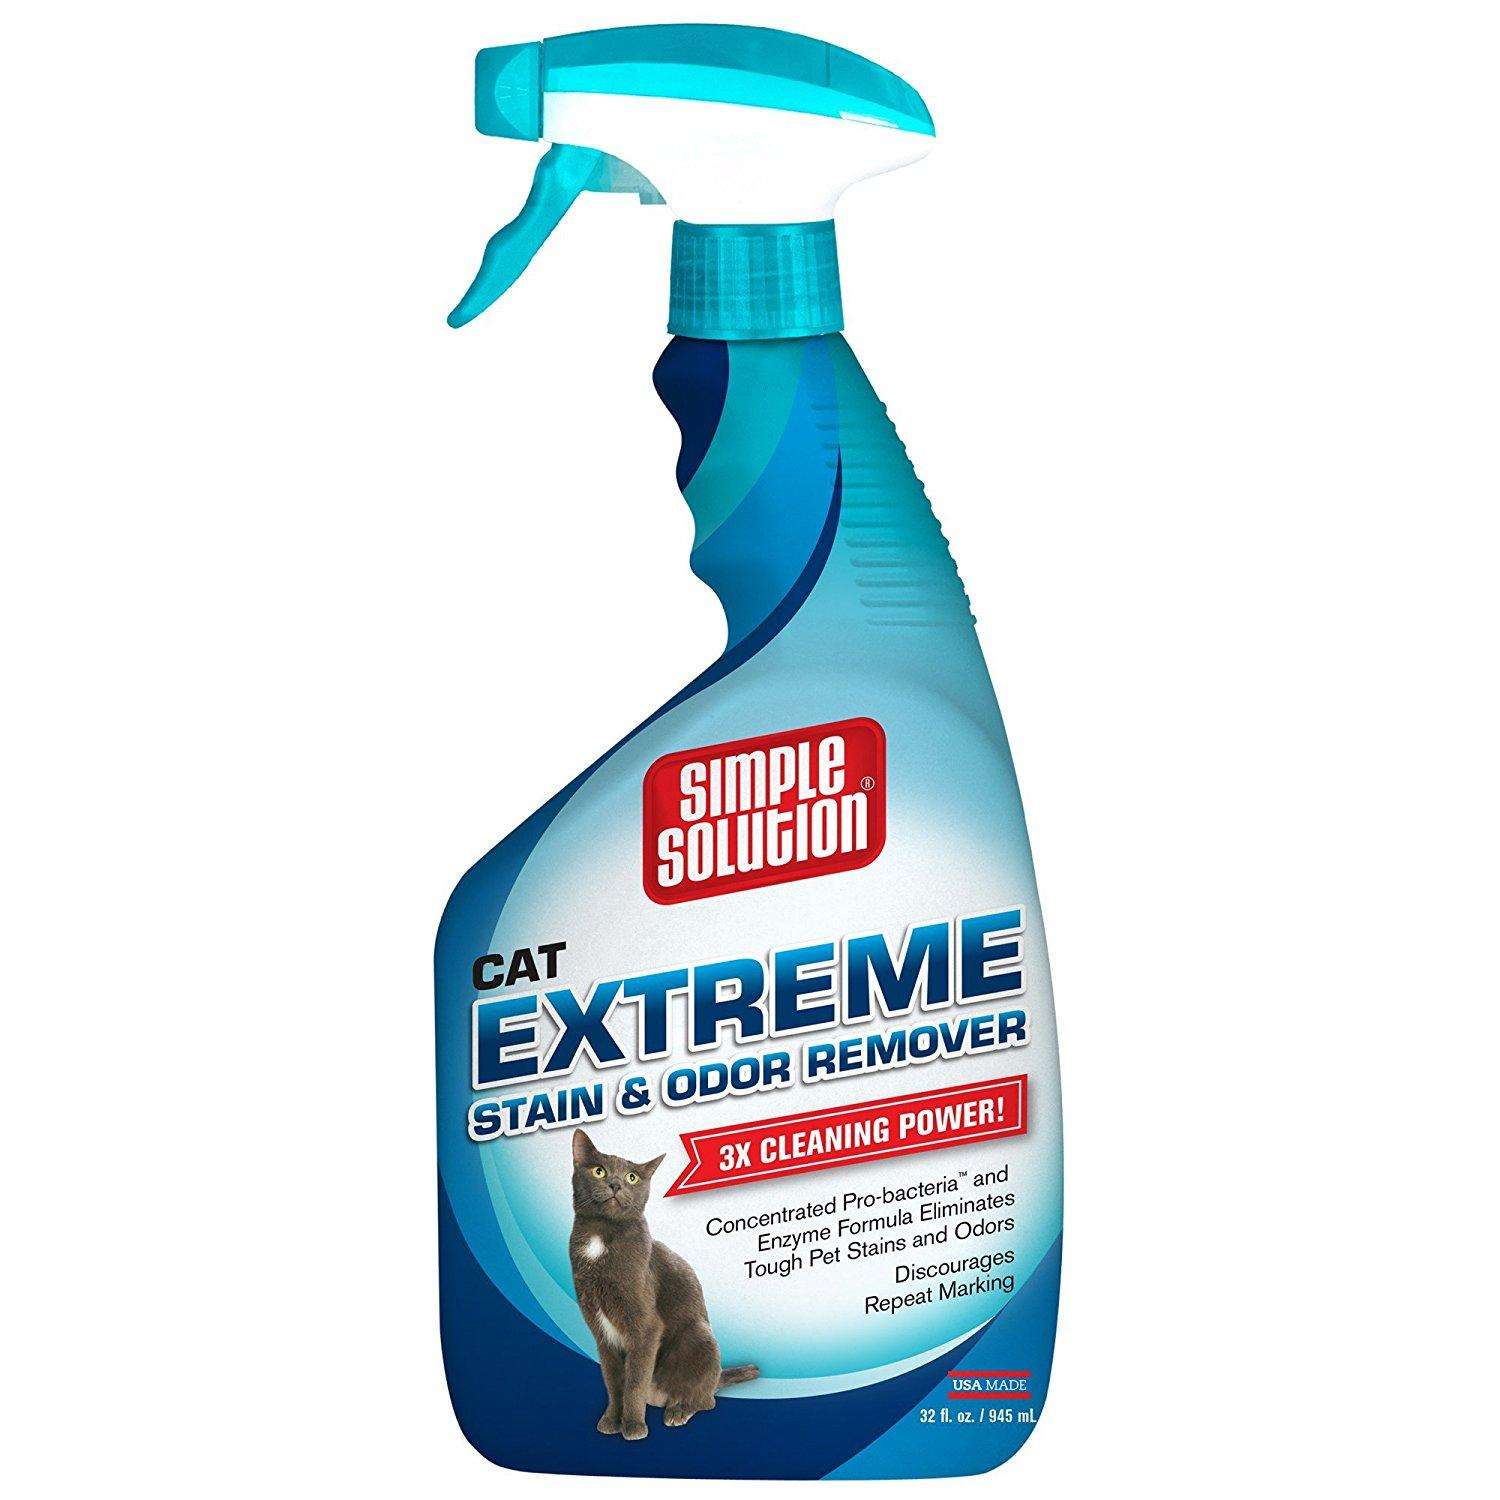 5 Best Cat Spray and Odor Removal Products